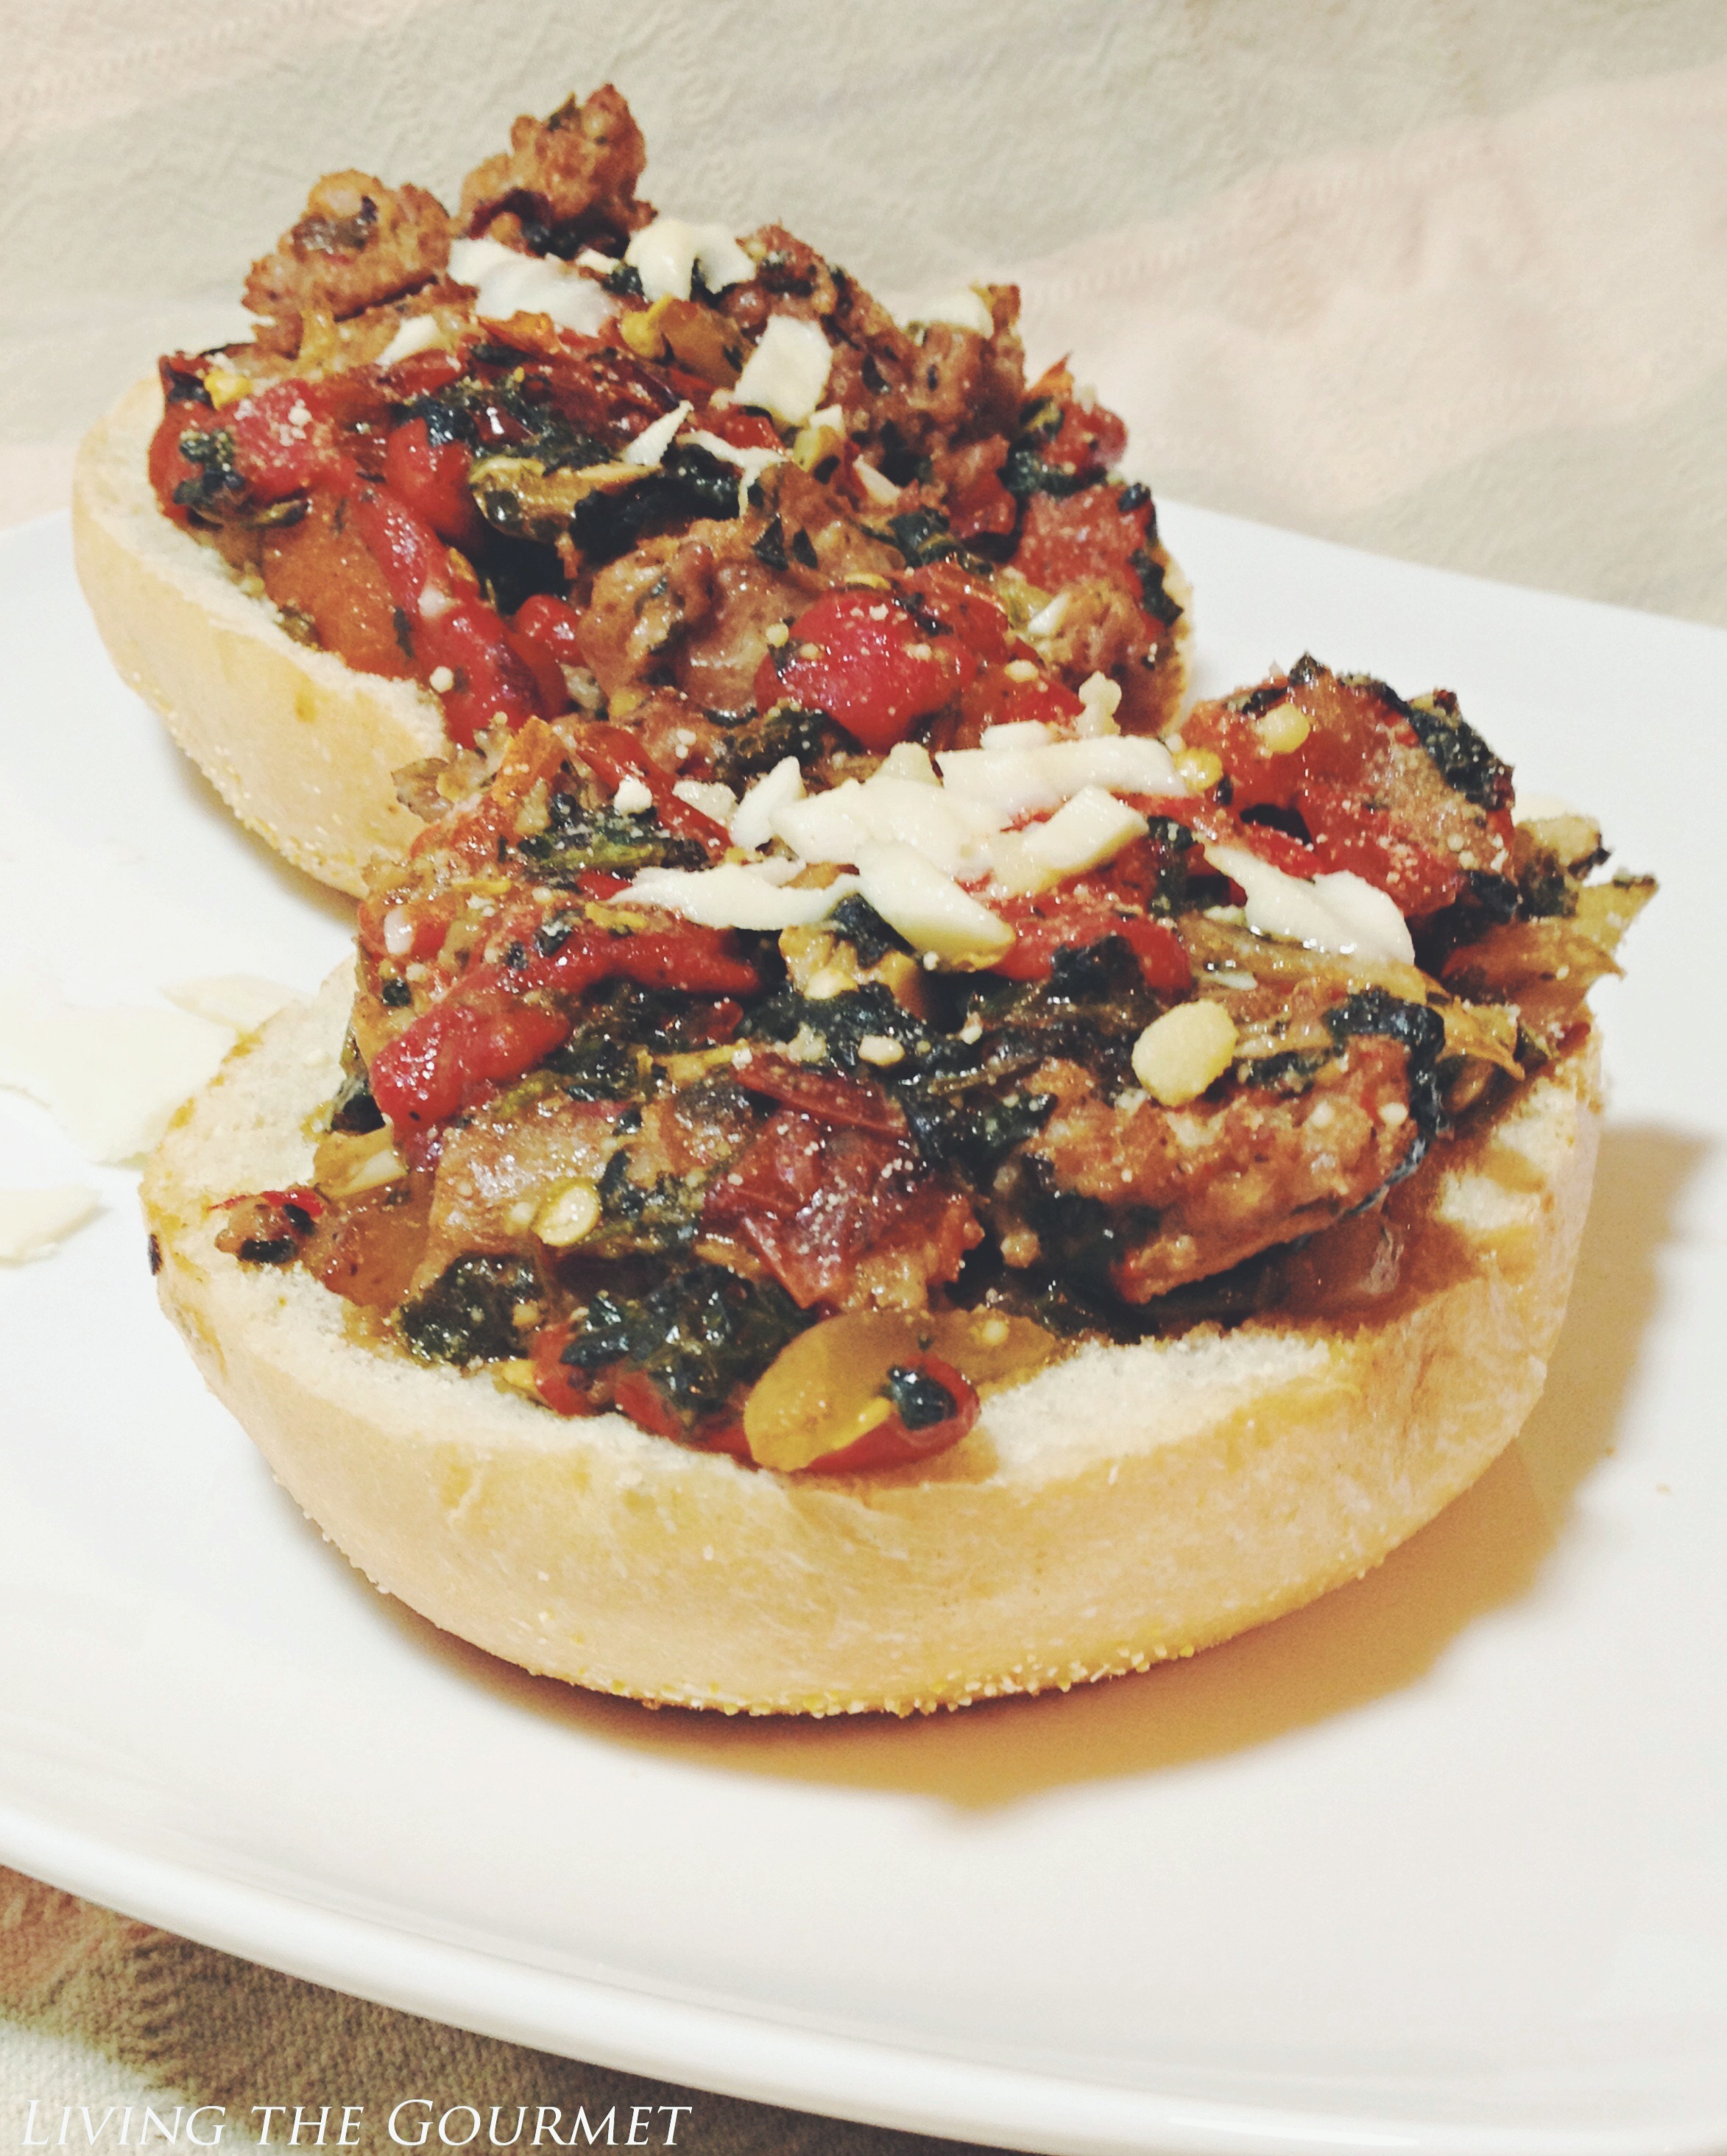 Living the Gourmet: Roasted Peppers & Creamed Spinach Sausage Sandwich